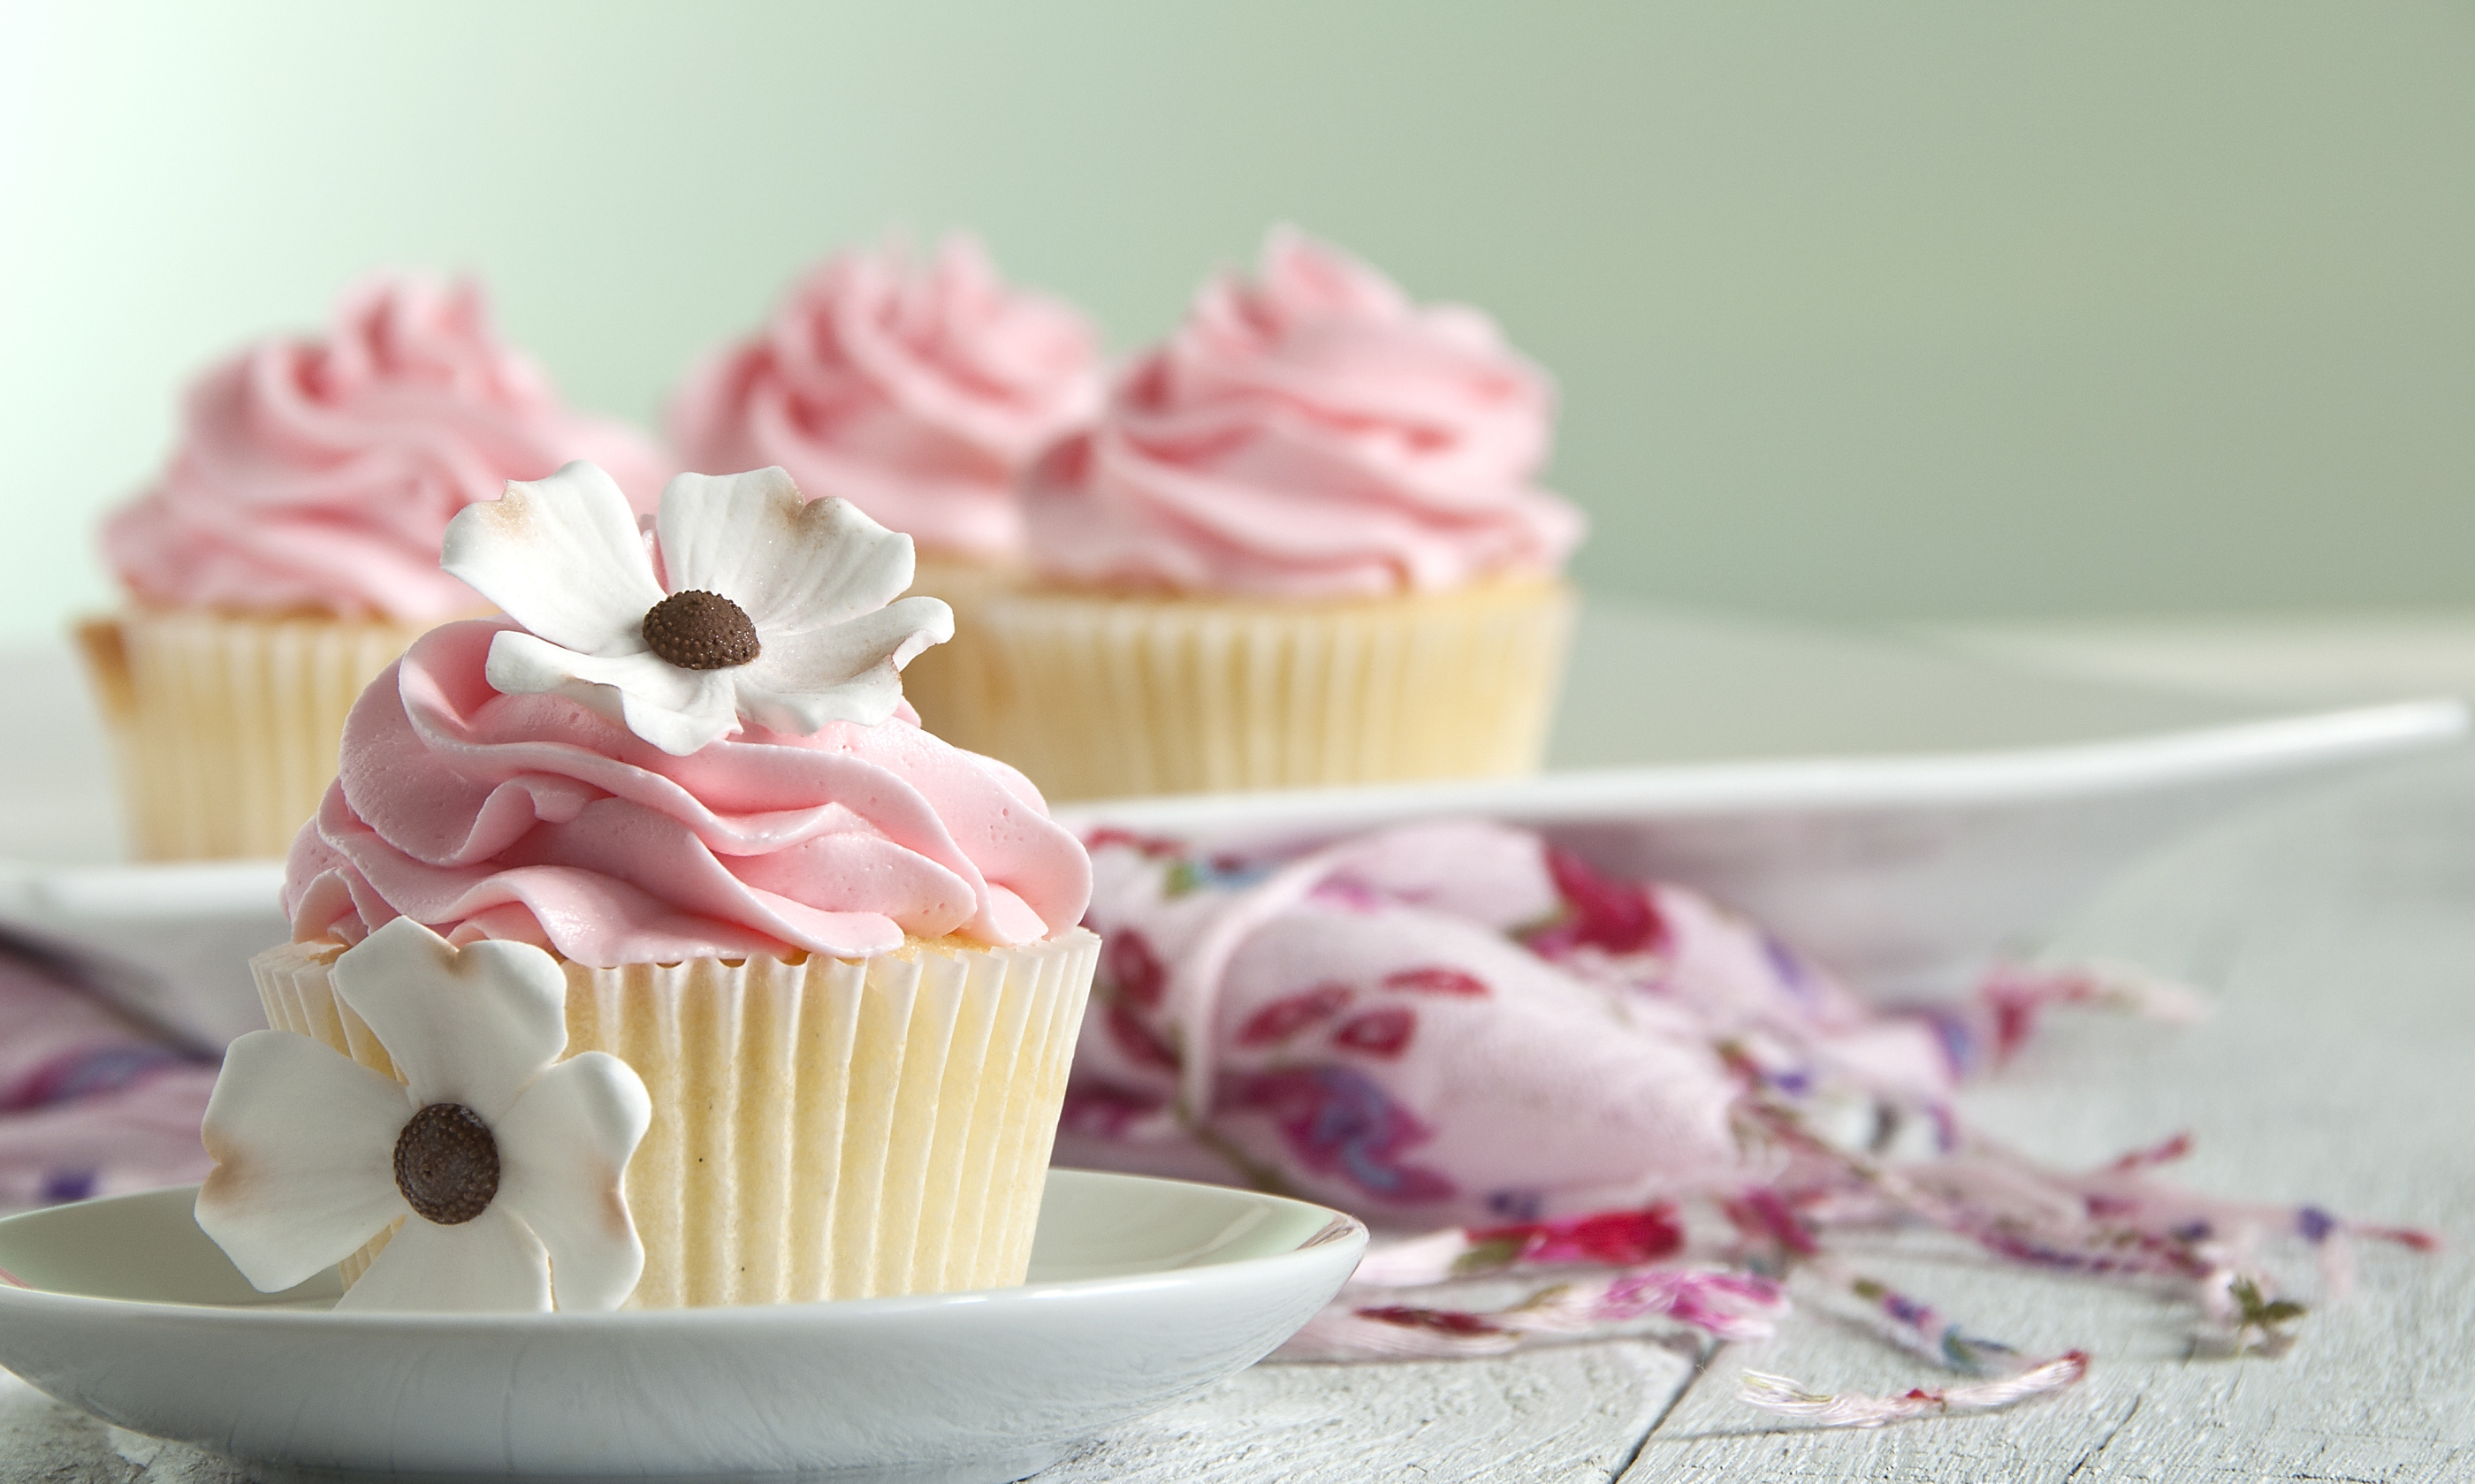 Mouth-watering cupcakes, HD backgrounds, Delectable treats, Sweet indulgence, 2800x1680 HD Desktop